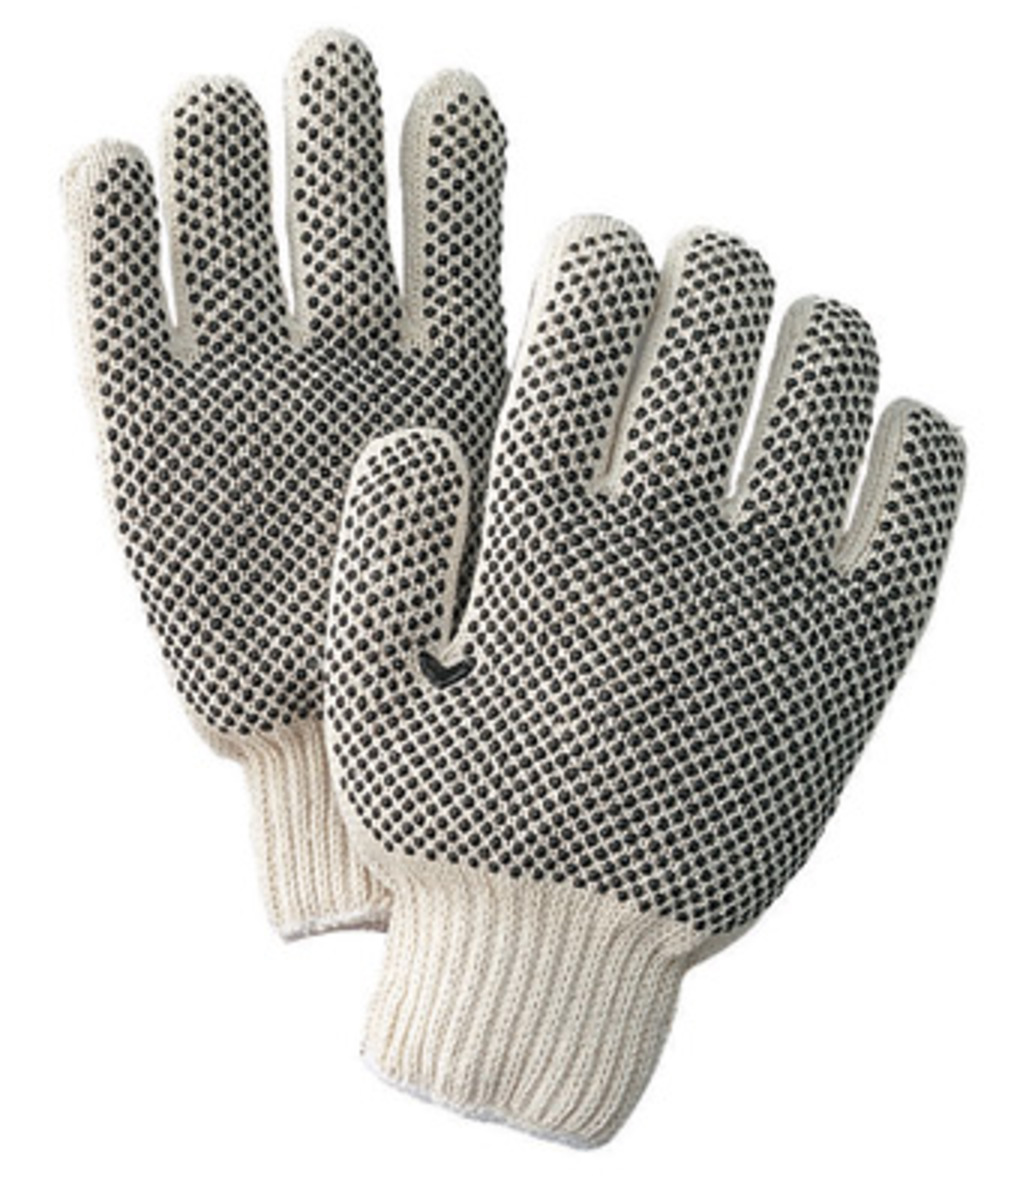 General Purpose Cotton gloves for sale online